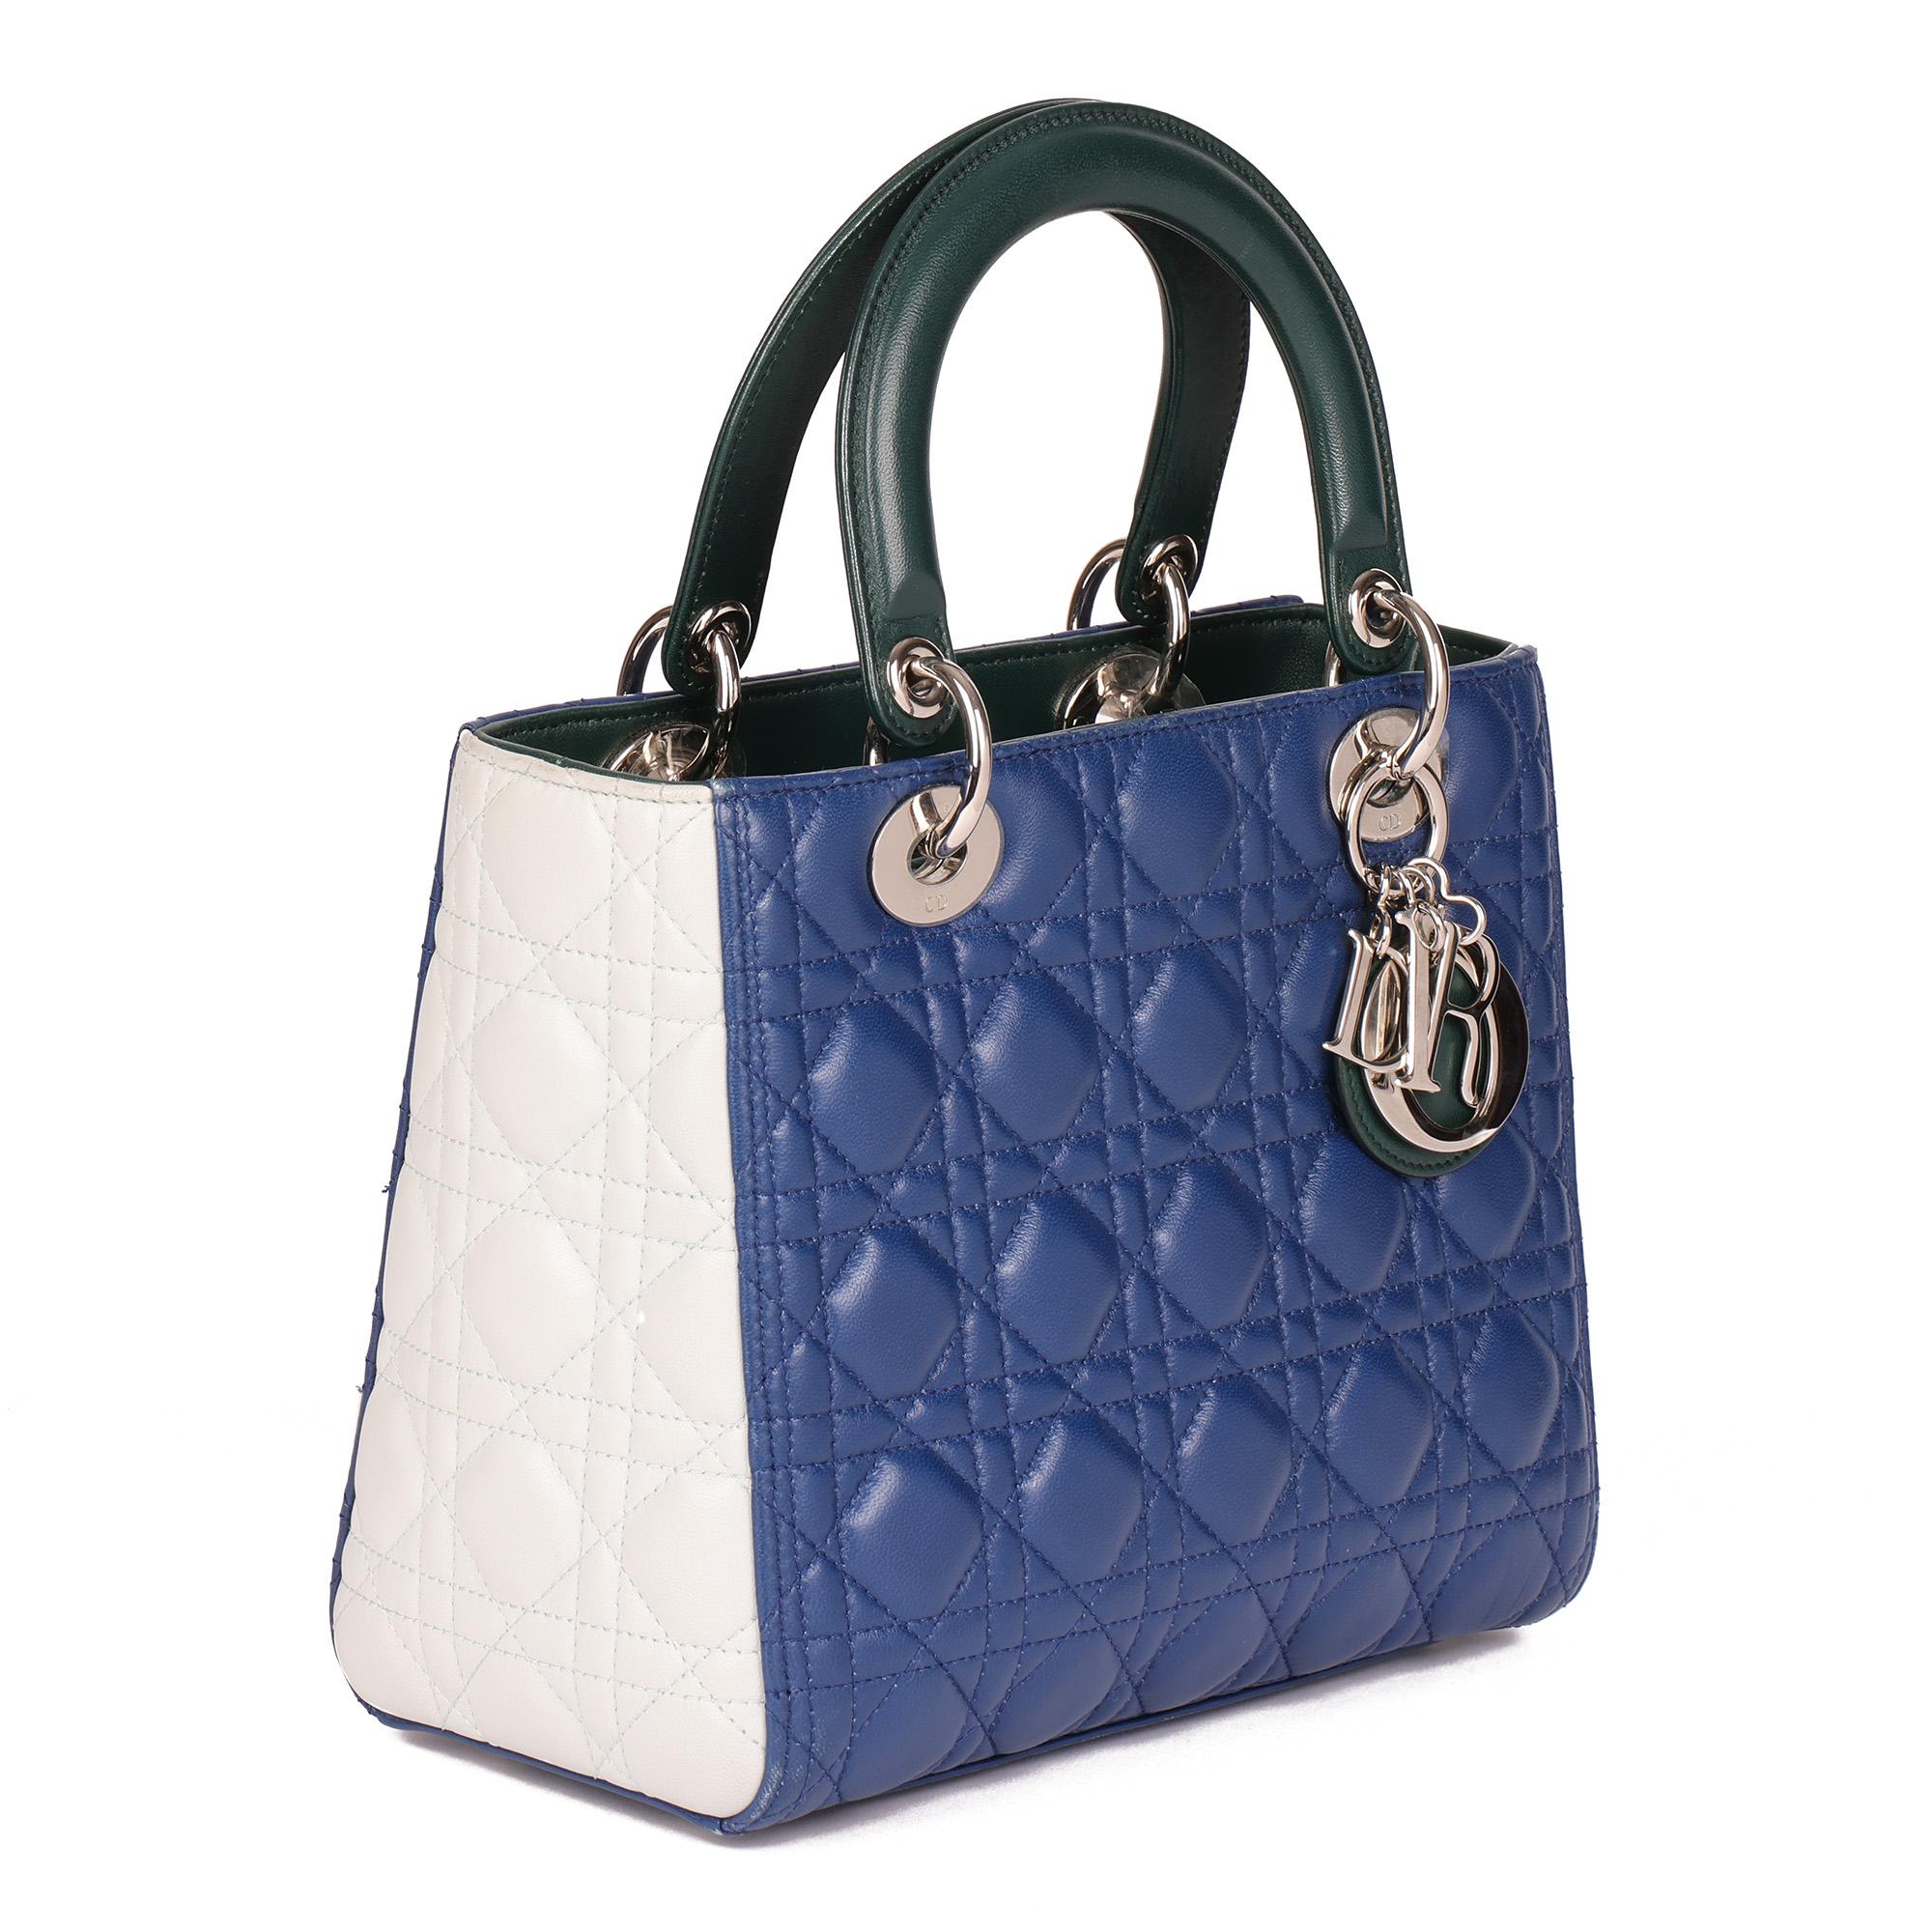 CHRISTIAN DIOR
Blue, Deep Green & Celeste Cannage Lambskin Leather Medium Lady Dior

Serial Number: 15-BO-0115
Age (Circa): 2015
Accompanied By: Christian Dior Dust Bag, Shoulder Strap
Authenticity Details: Date Stamp (Made in Italy)
Gender: